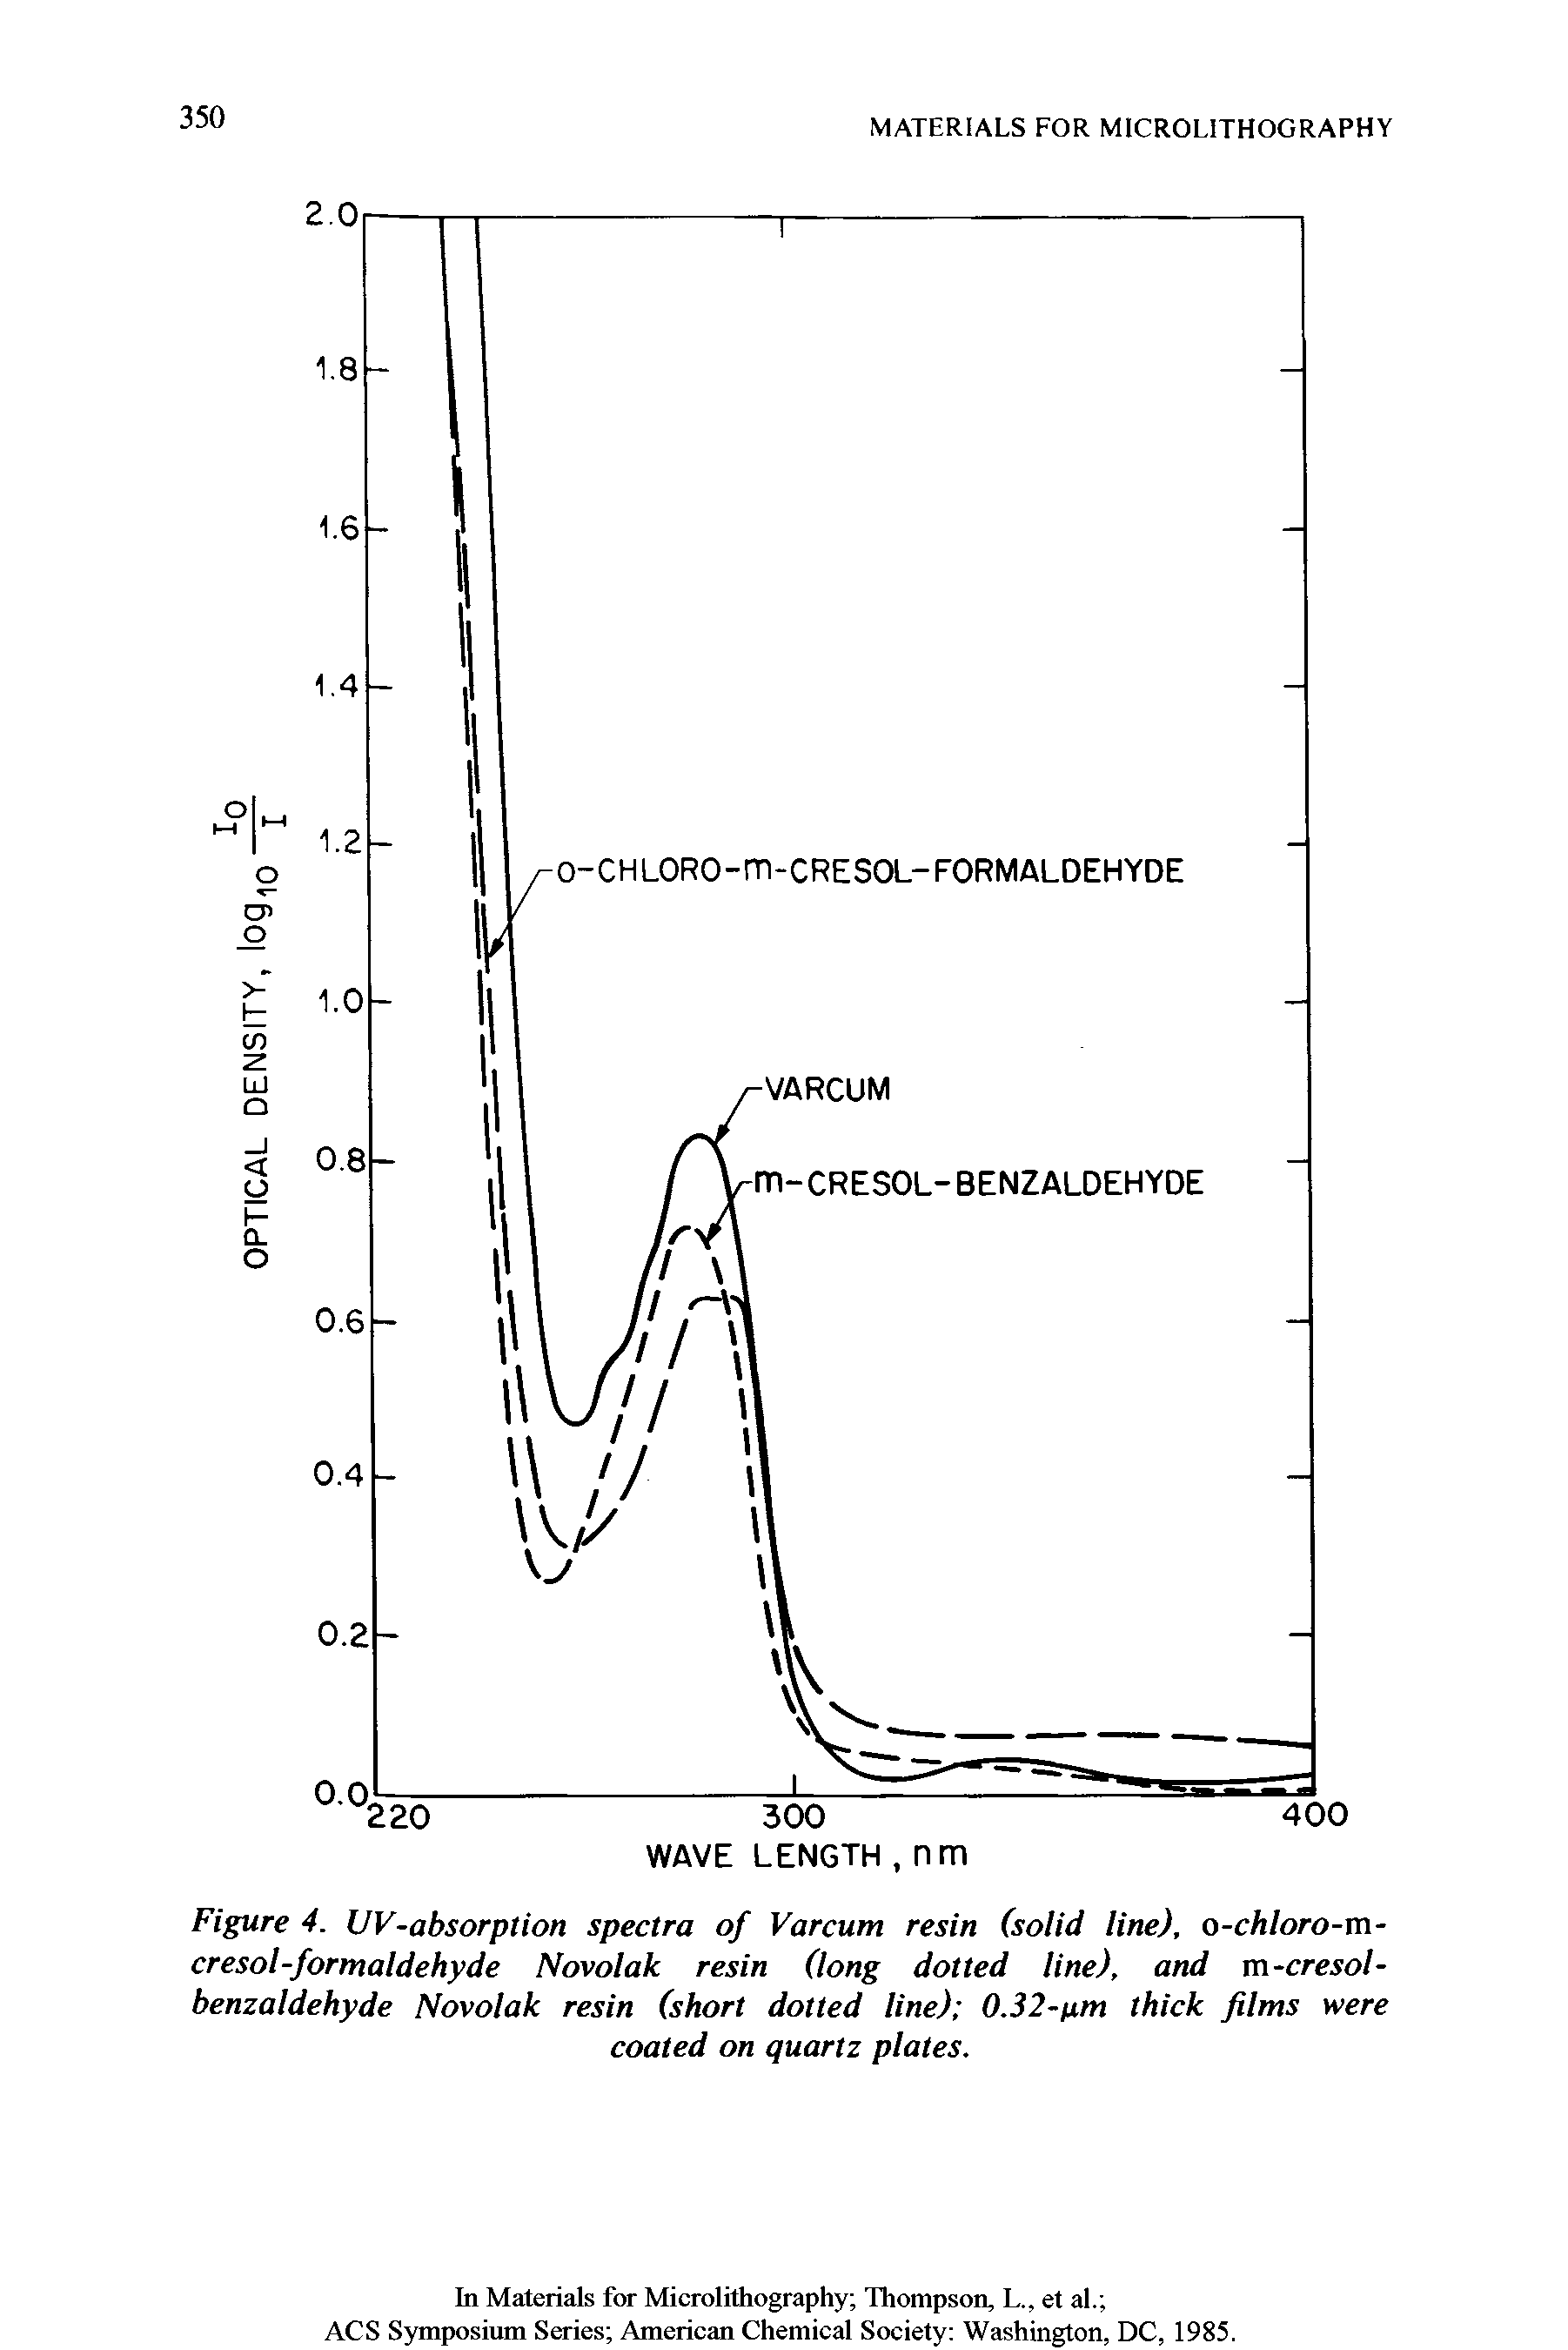 Figure 4. UV-absorption spectra of Varcum resin (solid line), o-chloro-m-cresol-formaldehyde Novolak resin (long dotted line), and m-cresol-benzaldehyde Novolak resin (short dotted line) 0.32- thick films were...